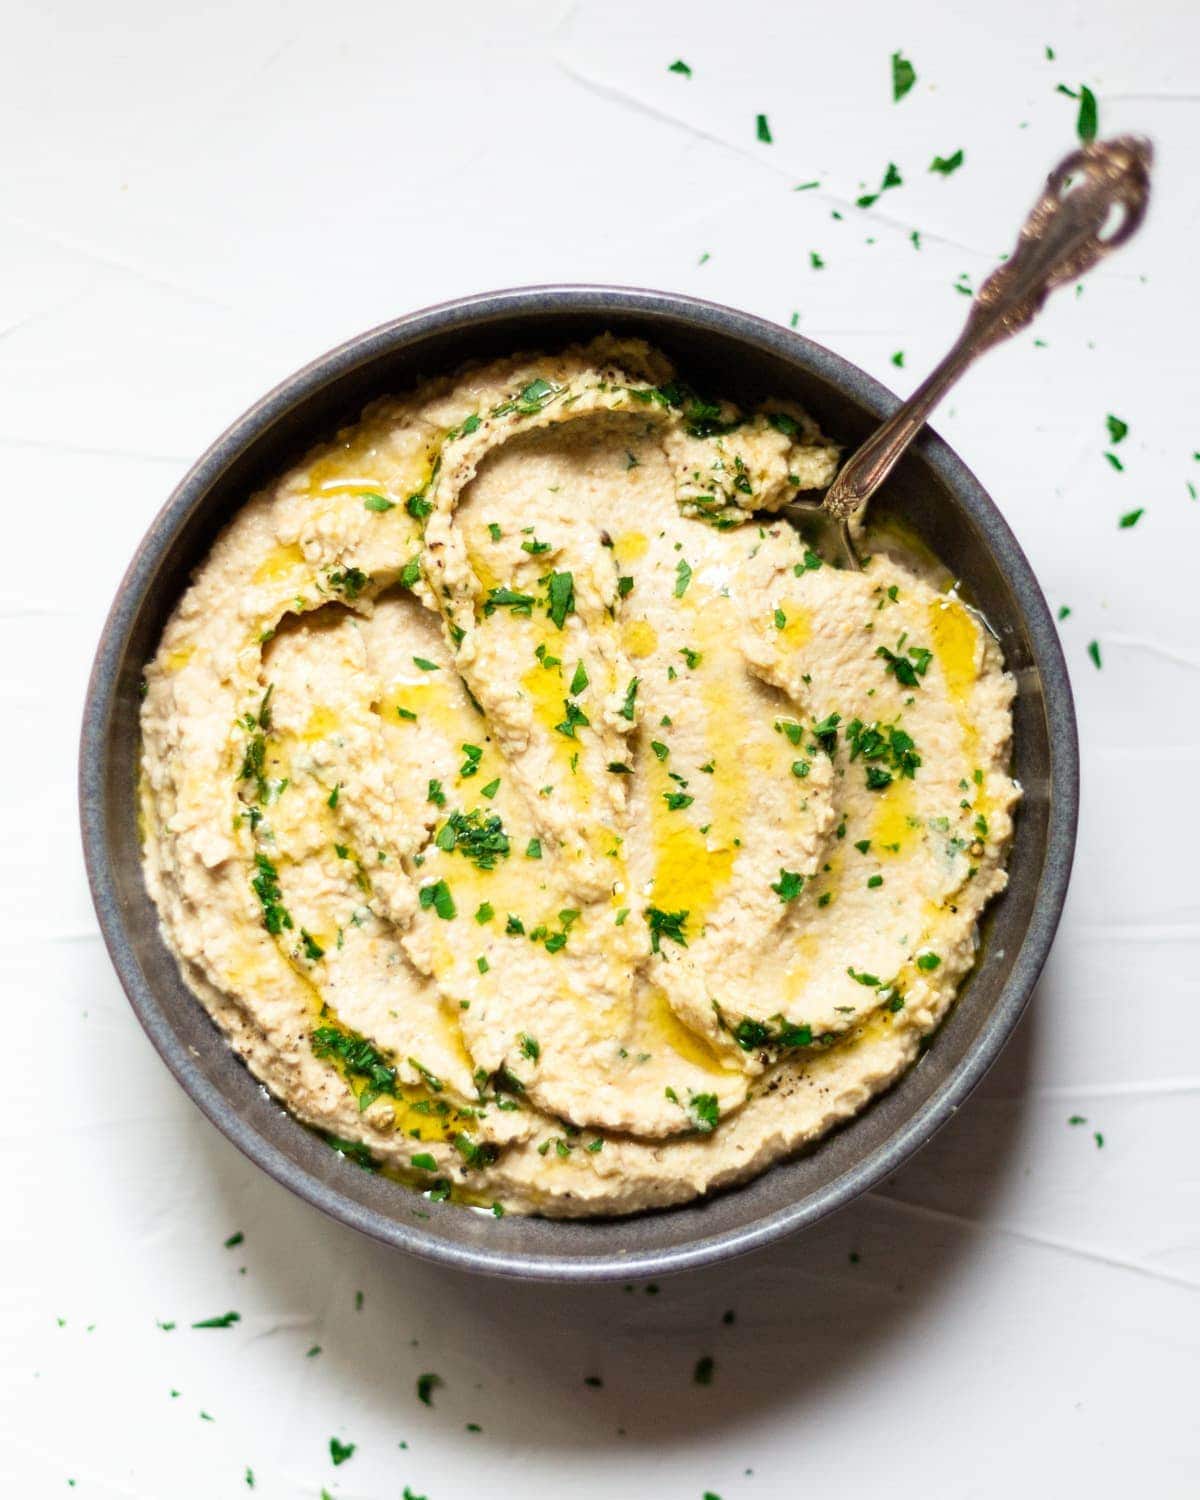 A dark grey bowl, filled with hummus, on a white background. The hummus has been drizzled with olive oil and fresh chopped parsley is sprinkled over.